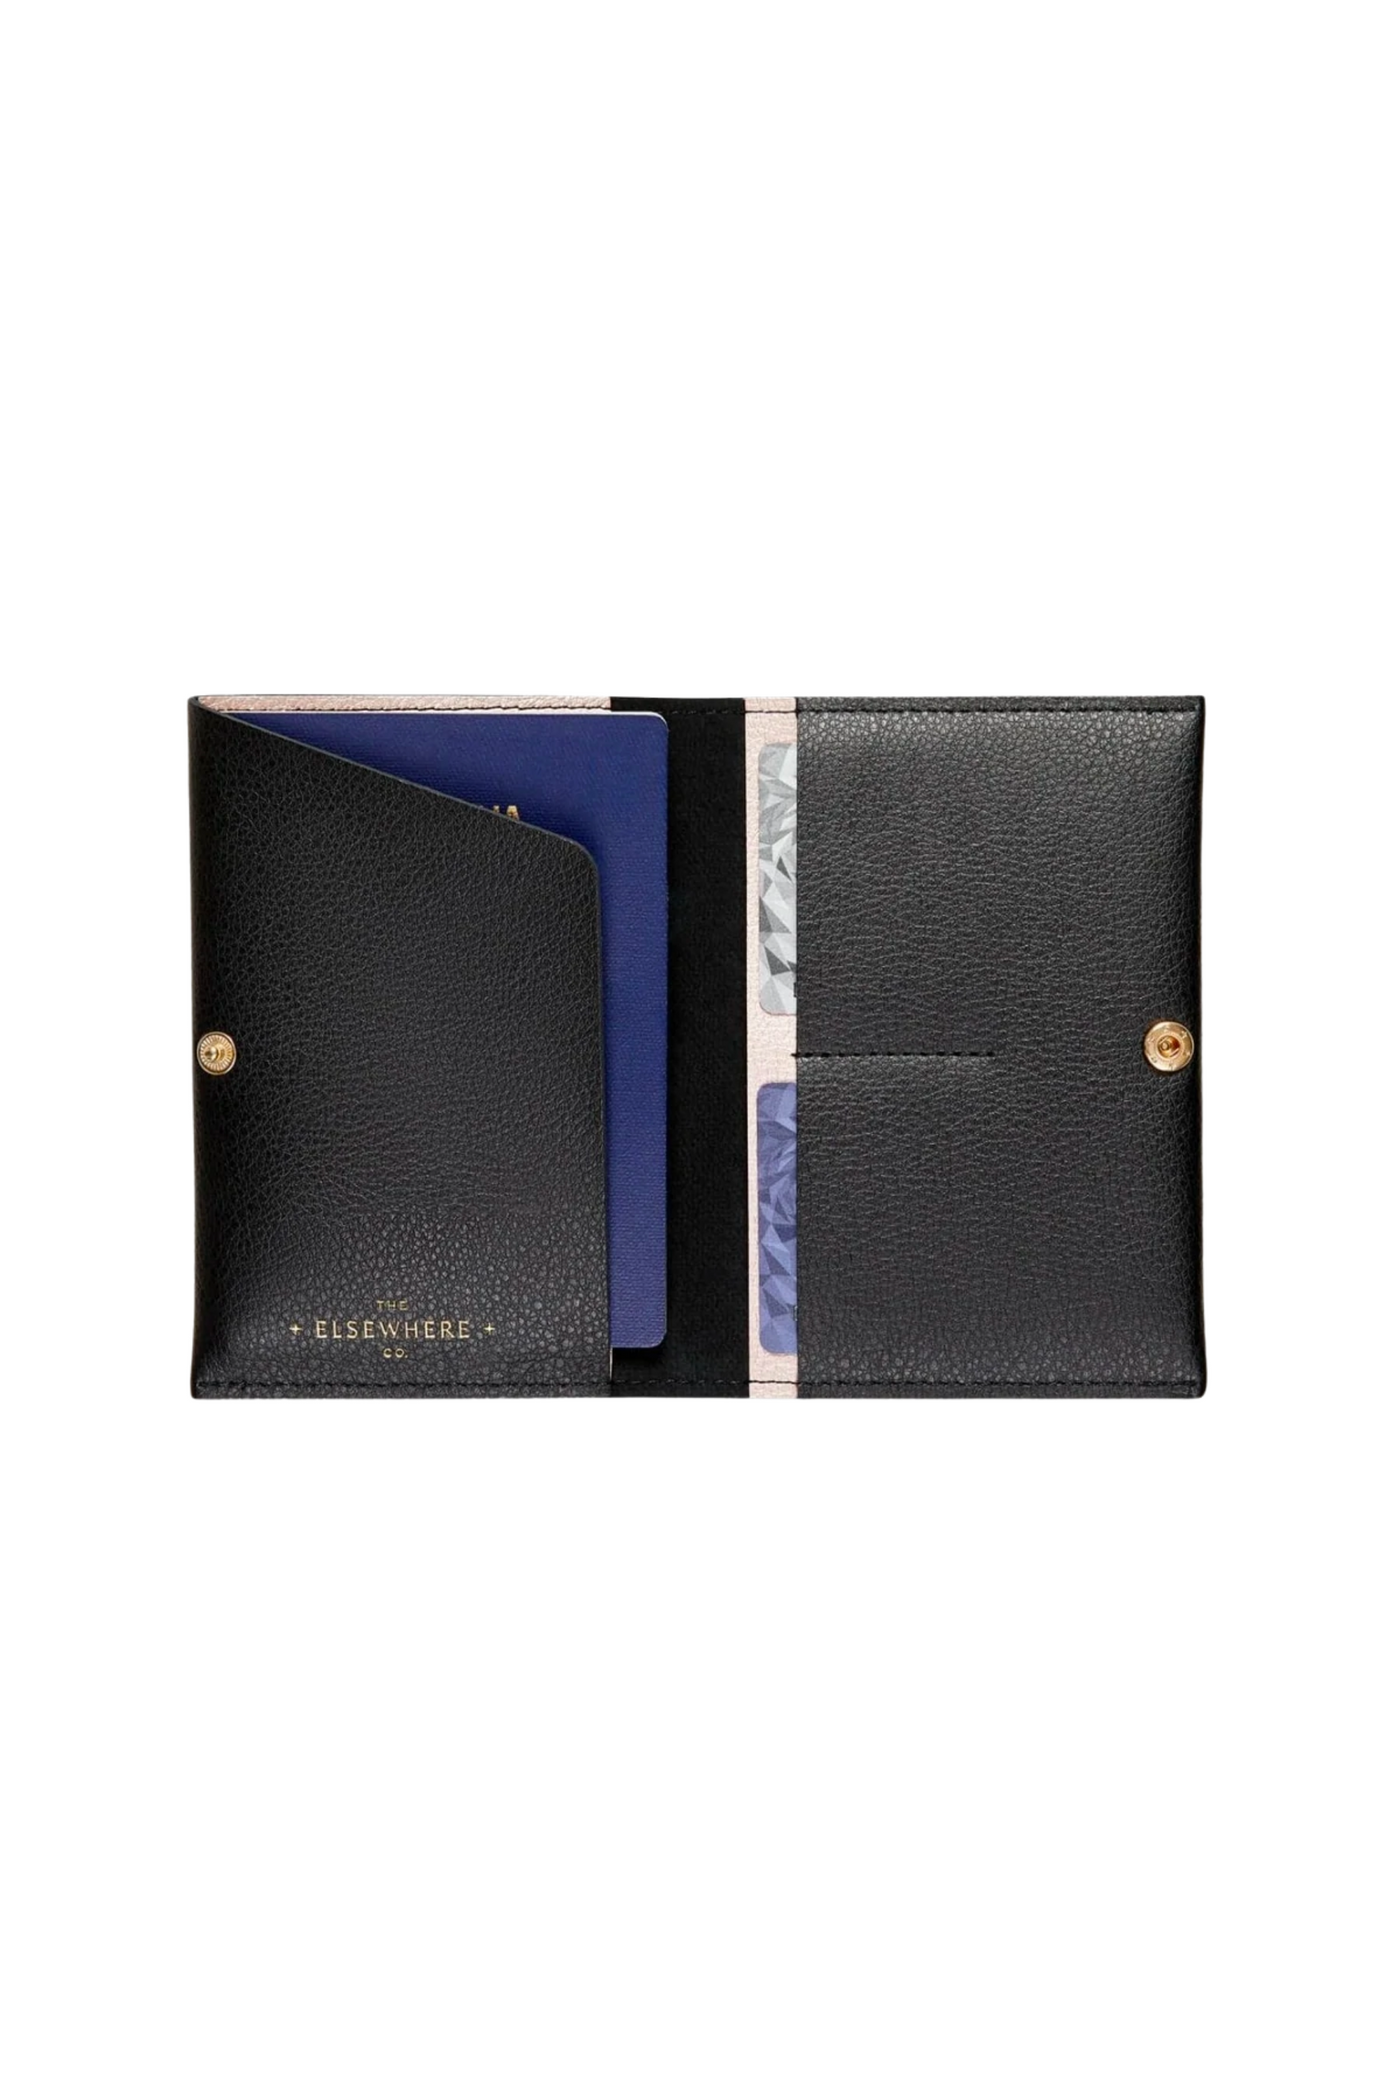 The Elsewhere Co. Passport Cover & Card Wallet in Nightfall Black, available on ZERRIN with free Singapore shipping